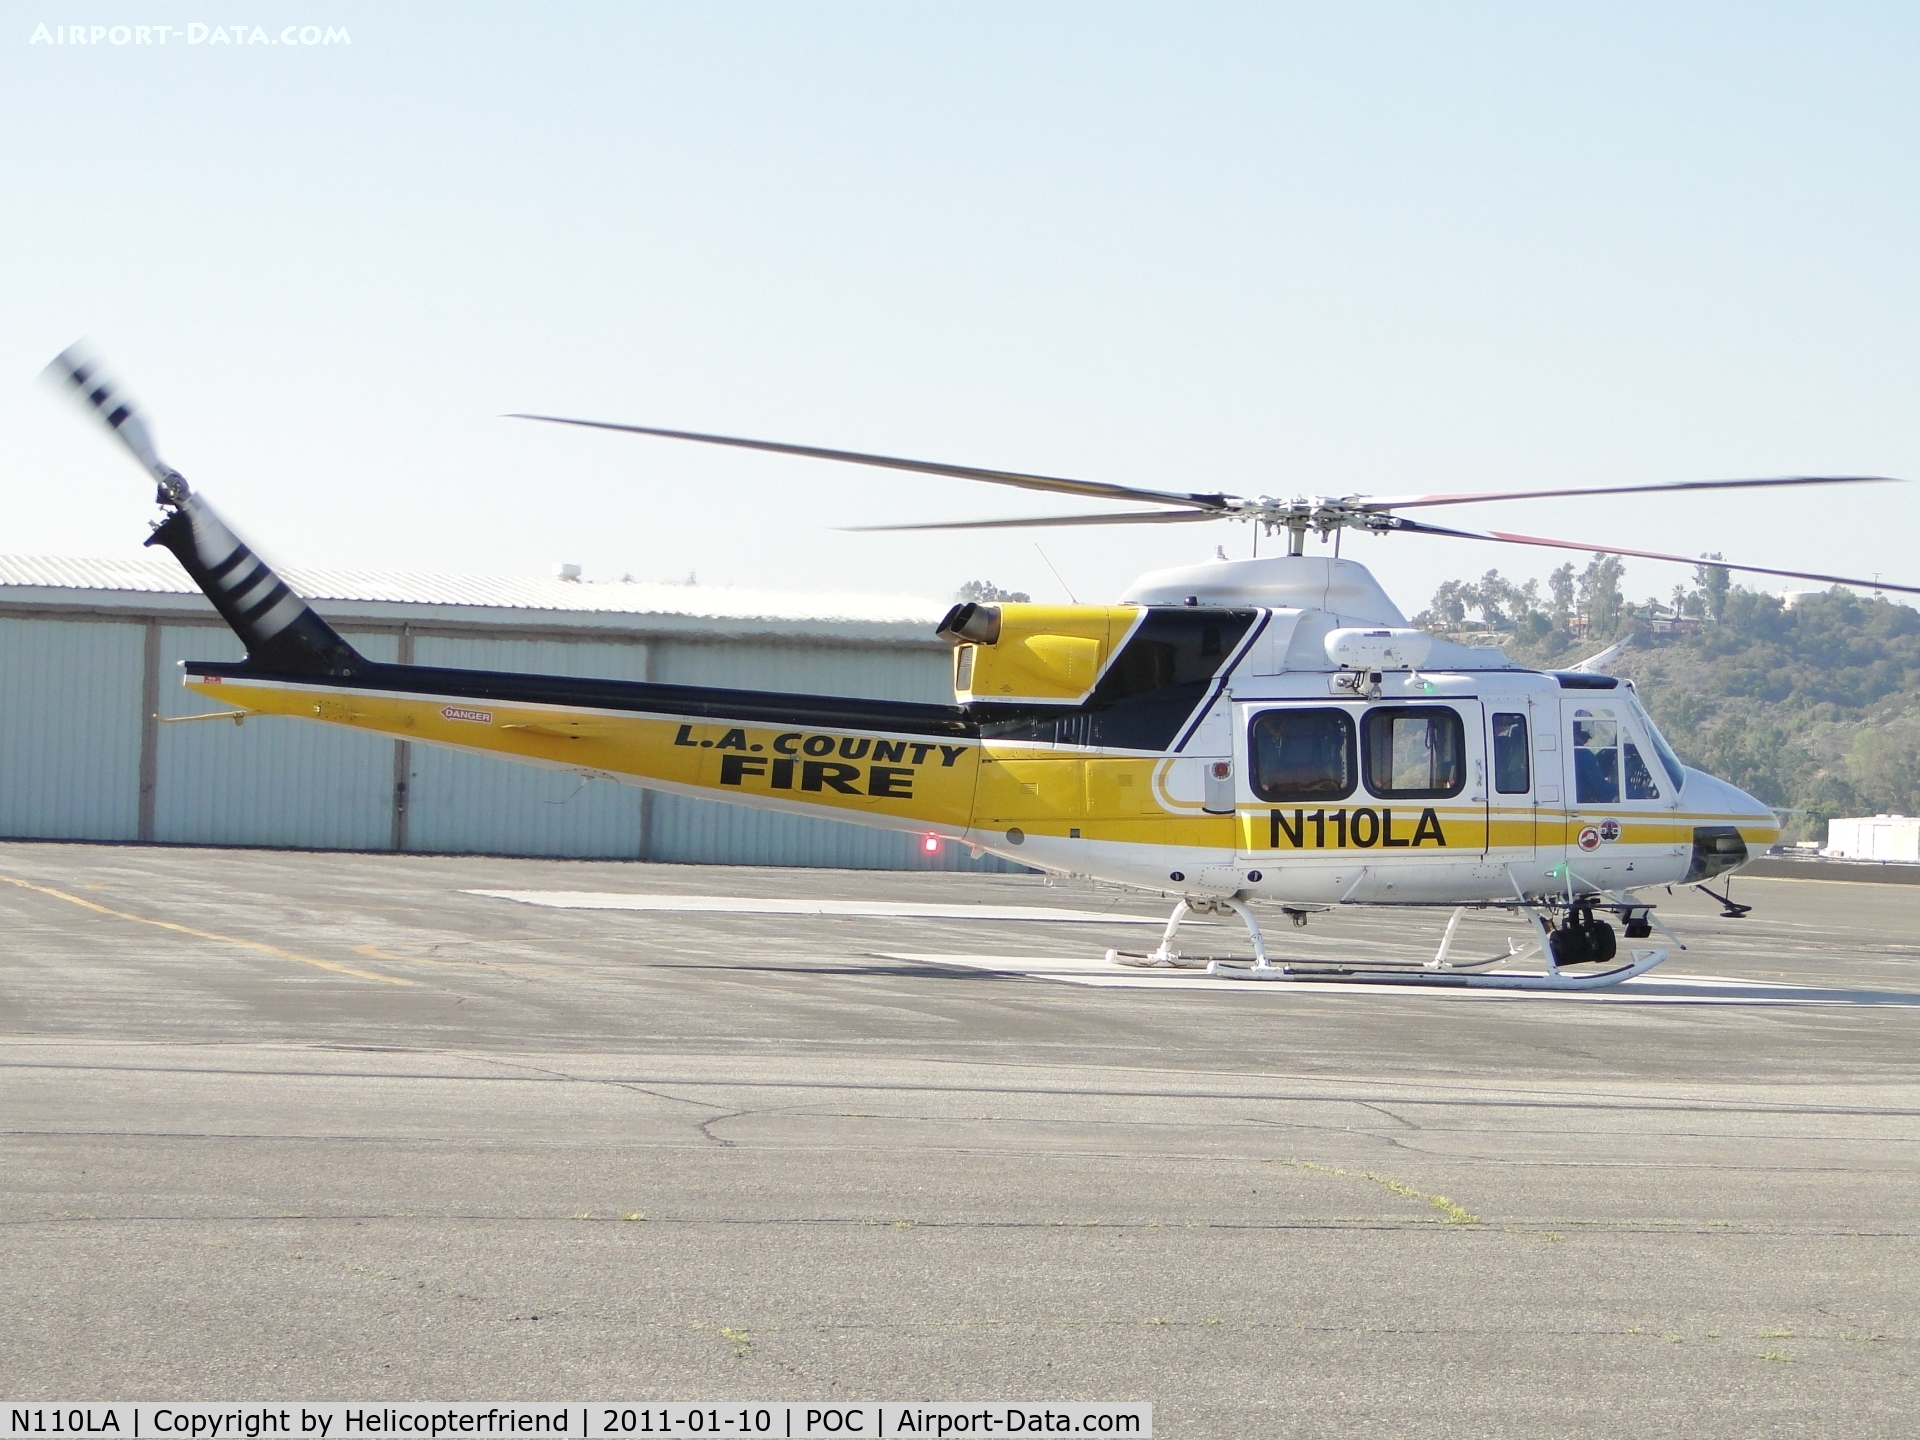 N110LA, 2005 Bell 412EP C/N 36392, Loaded up and ready to go